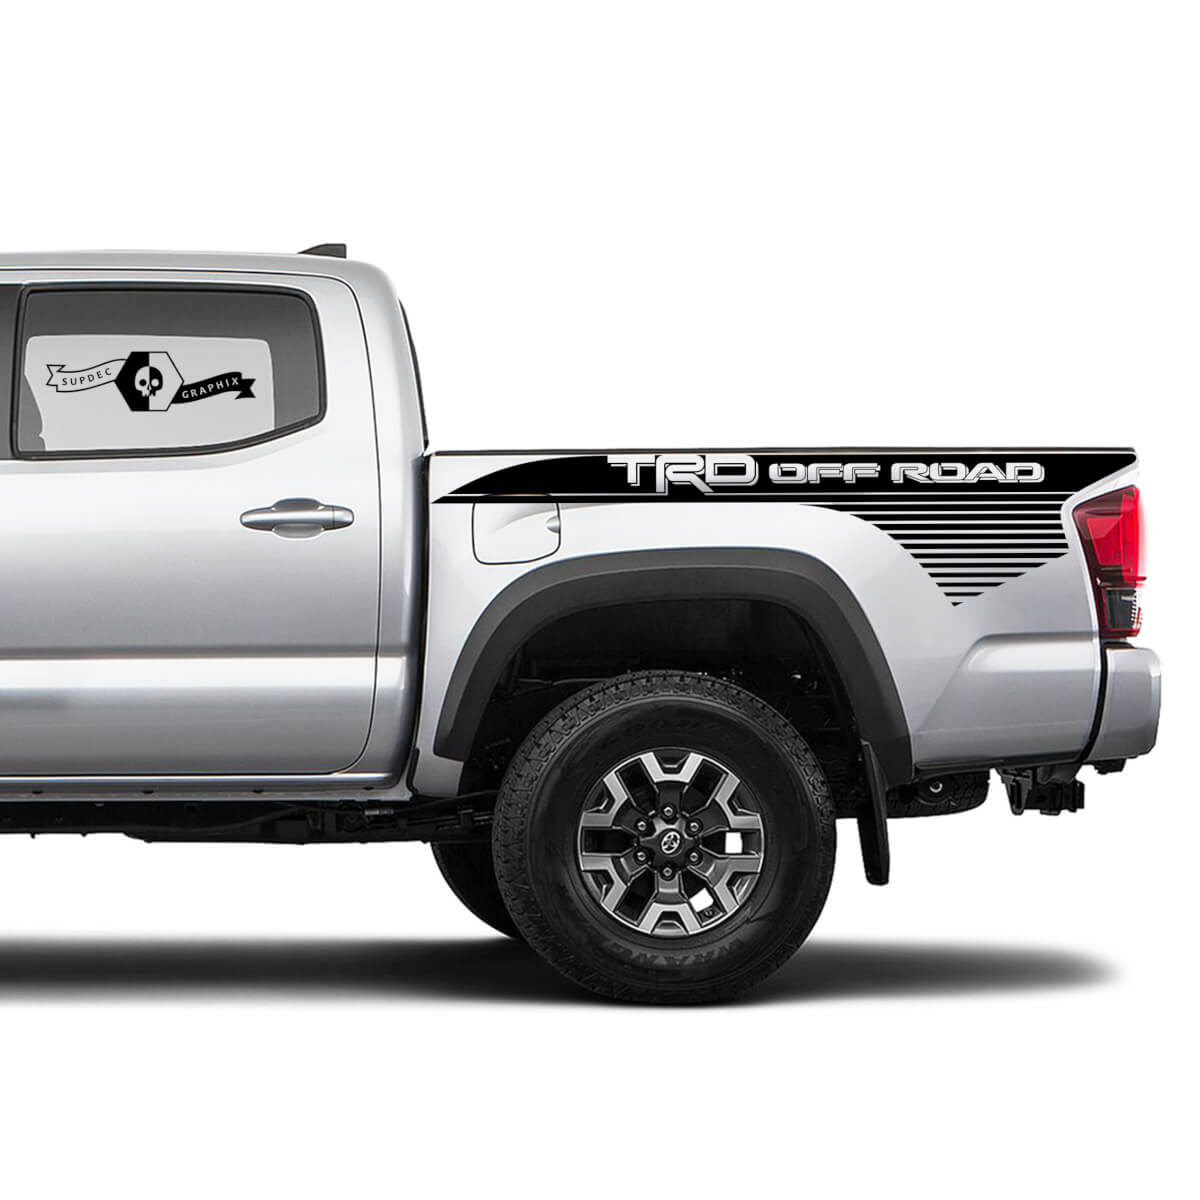 2 Decal sticker kit For Toyota Trd Off-Road Tacoma Stripe Bed Decal Sticker Graphic Side WRAP